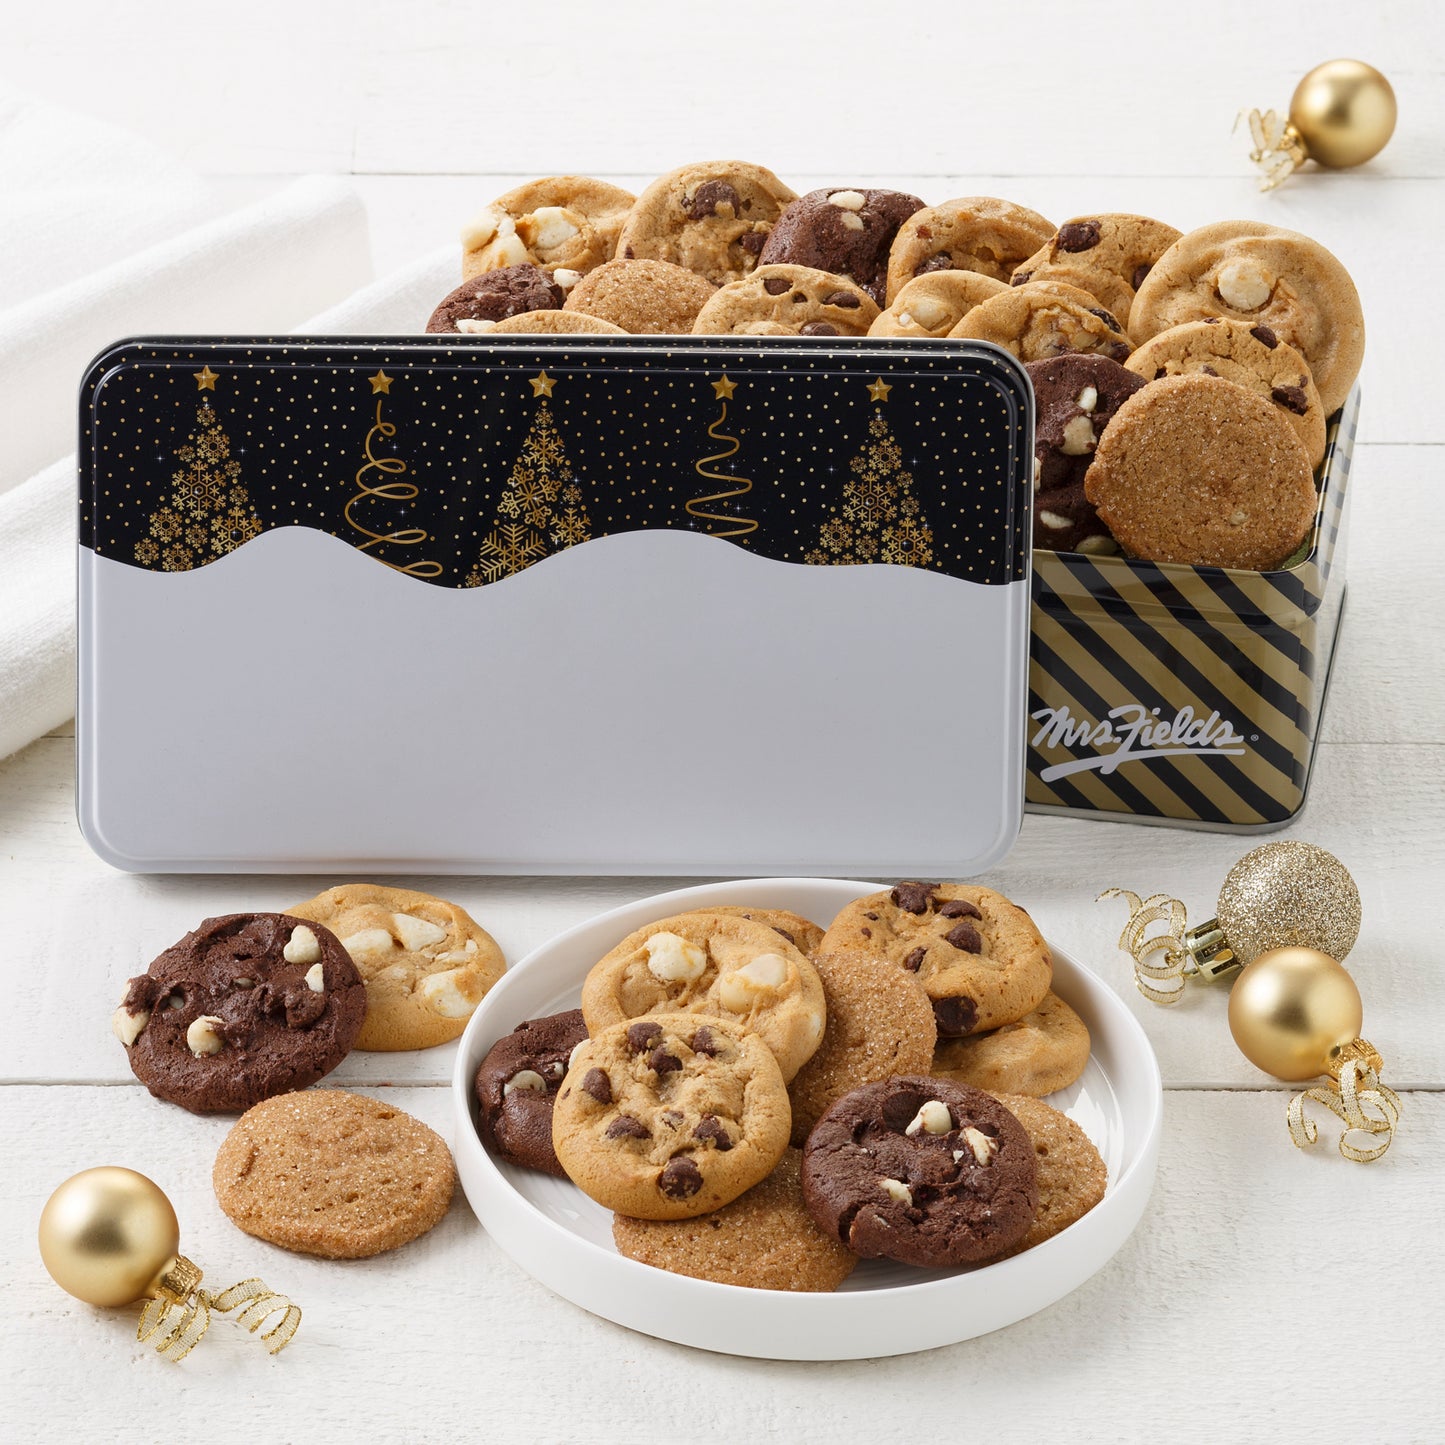 A black and white holiday tins decorated with Christmas trees and filled with an assortment of Nibblers®